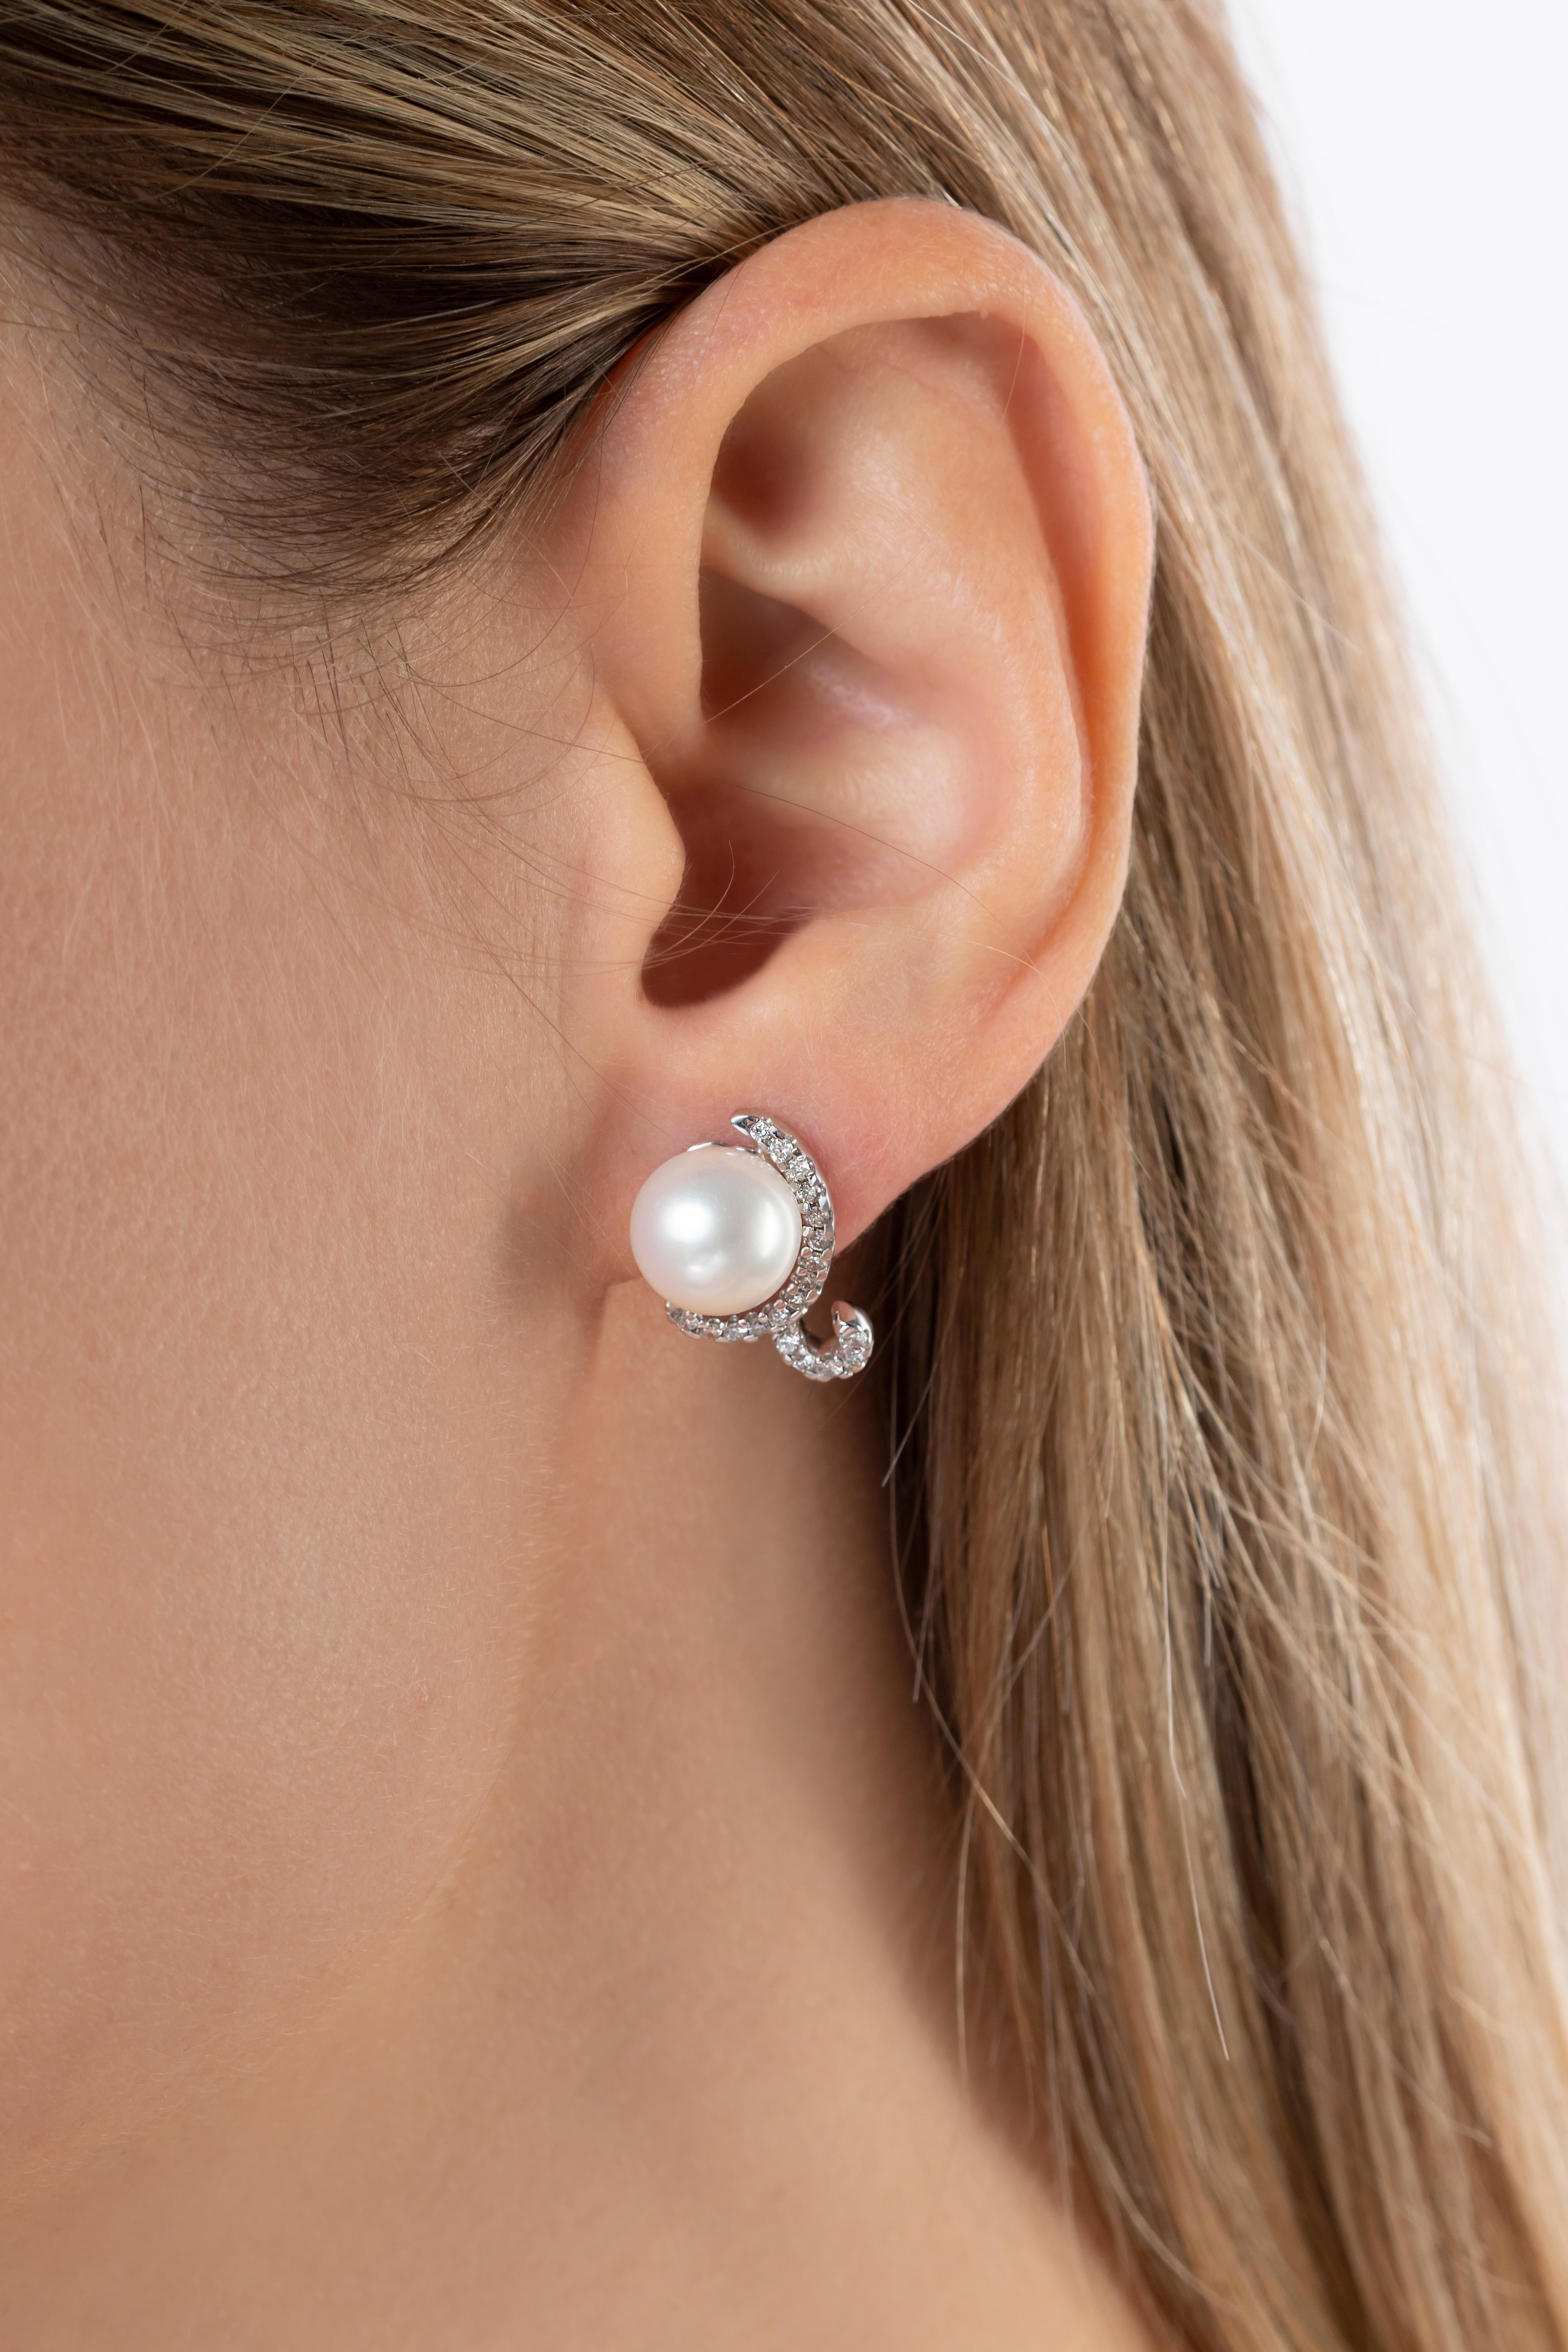 These captivating earrings by Yoko London feature lustrous Freshwater pearls embedded in an ornate diamond setting. Beguiling and elegant, these unique earrings will add a touch of unparalleled elegance to both daytime and evening looks. Pair with